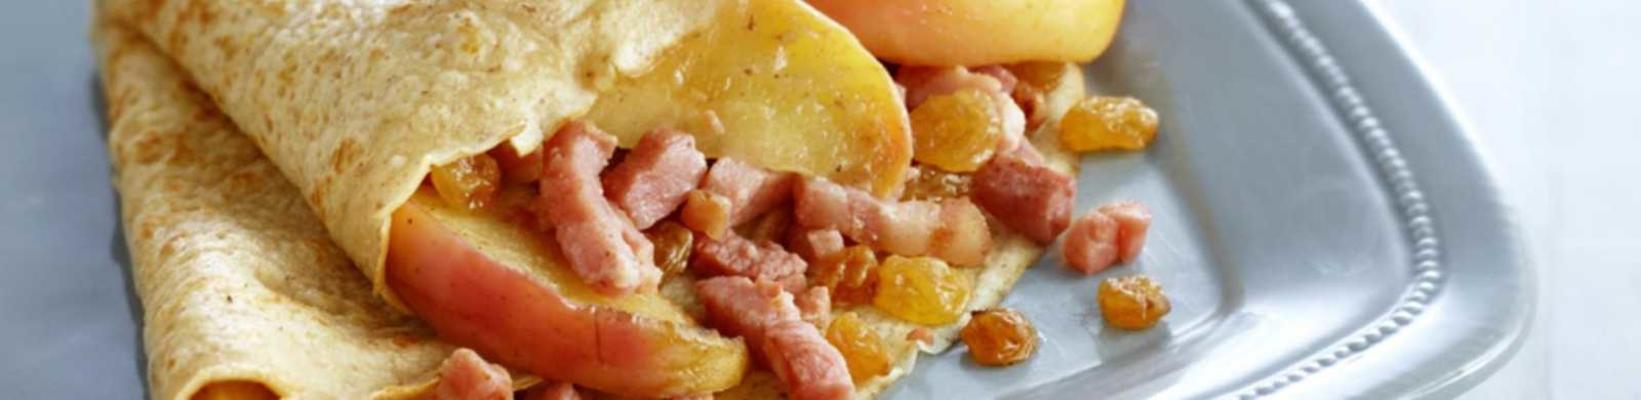 pancake filled with bacon and apple